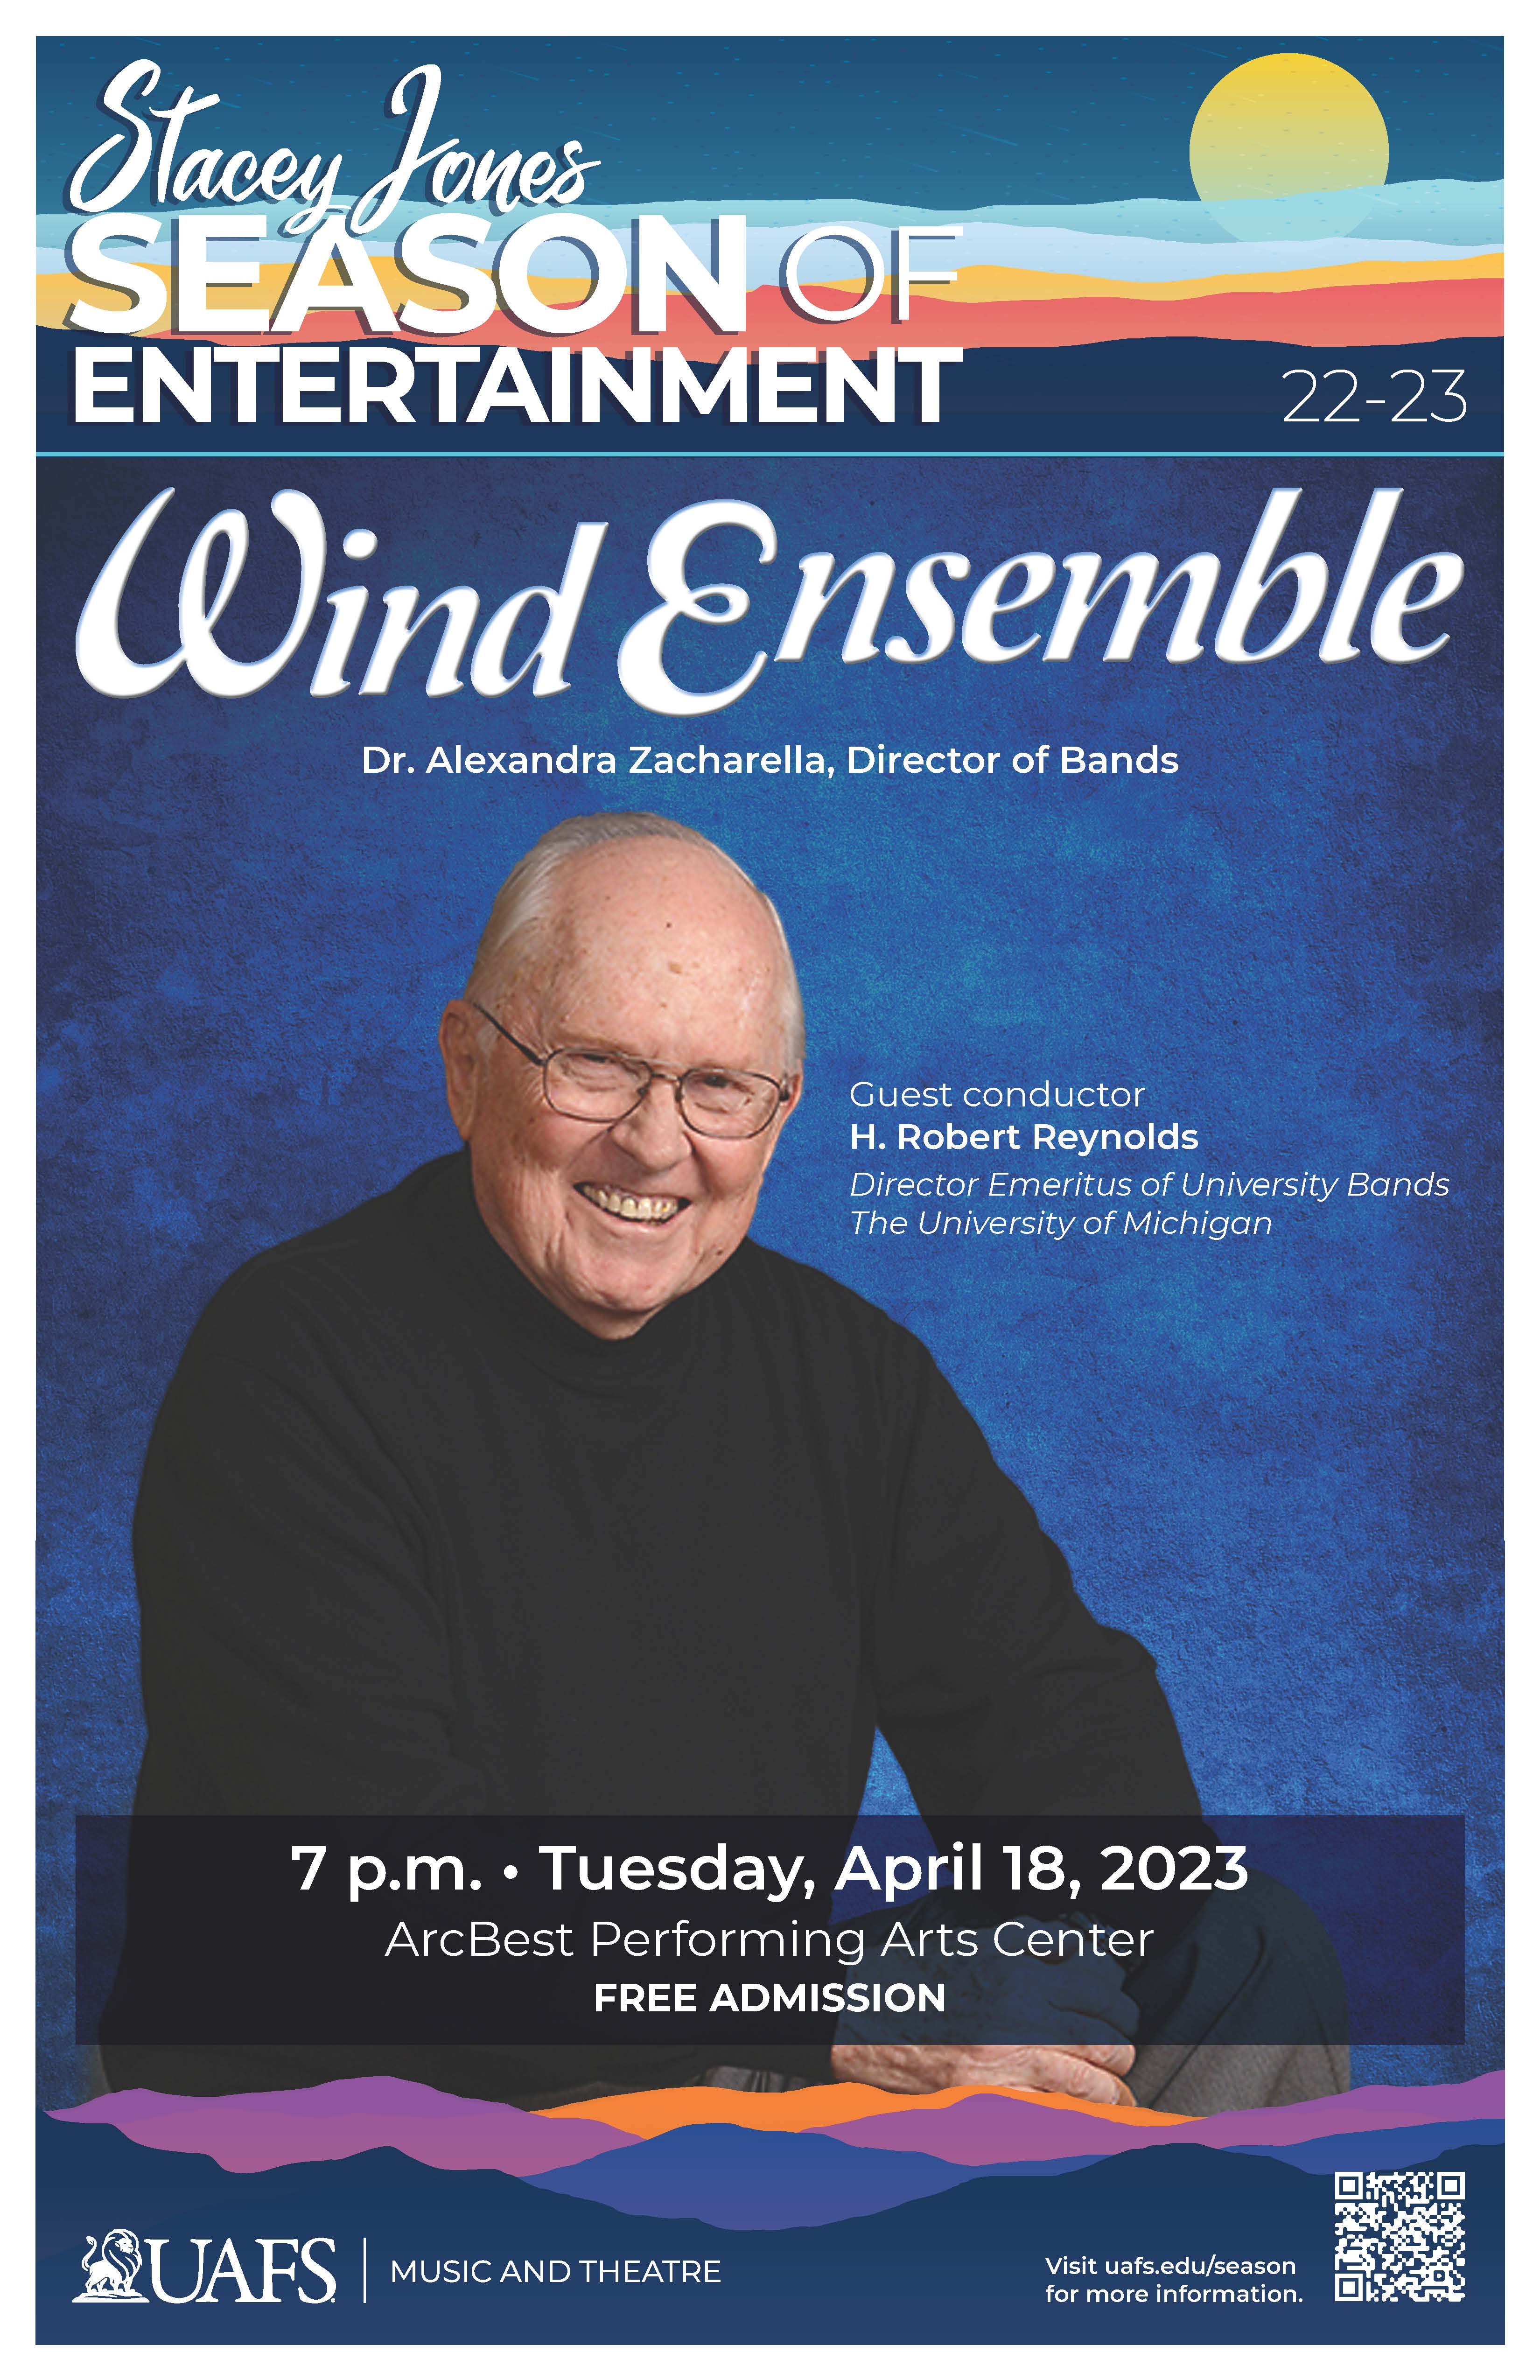 Event poster with photo of guest conductor